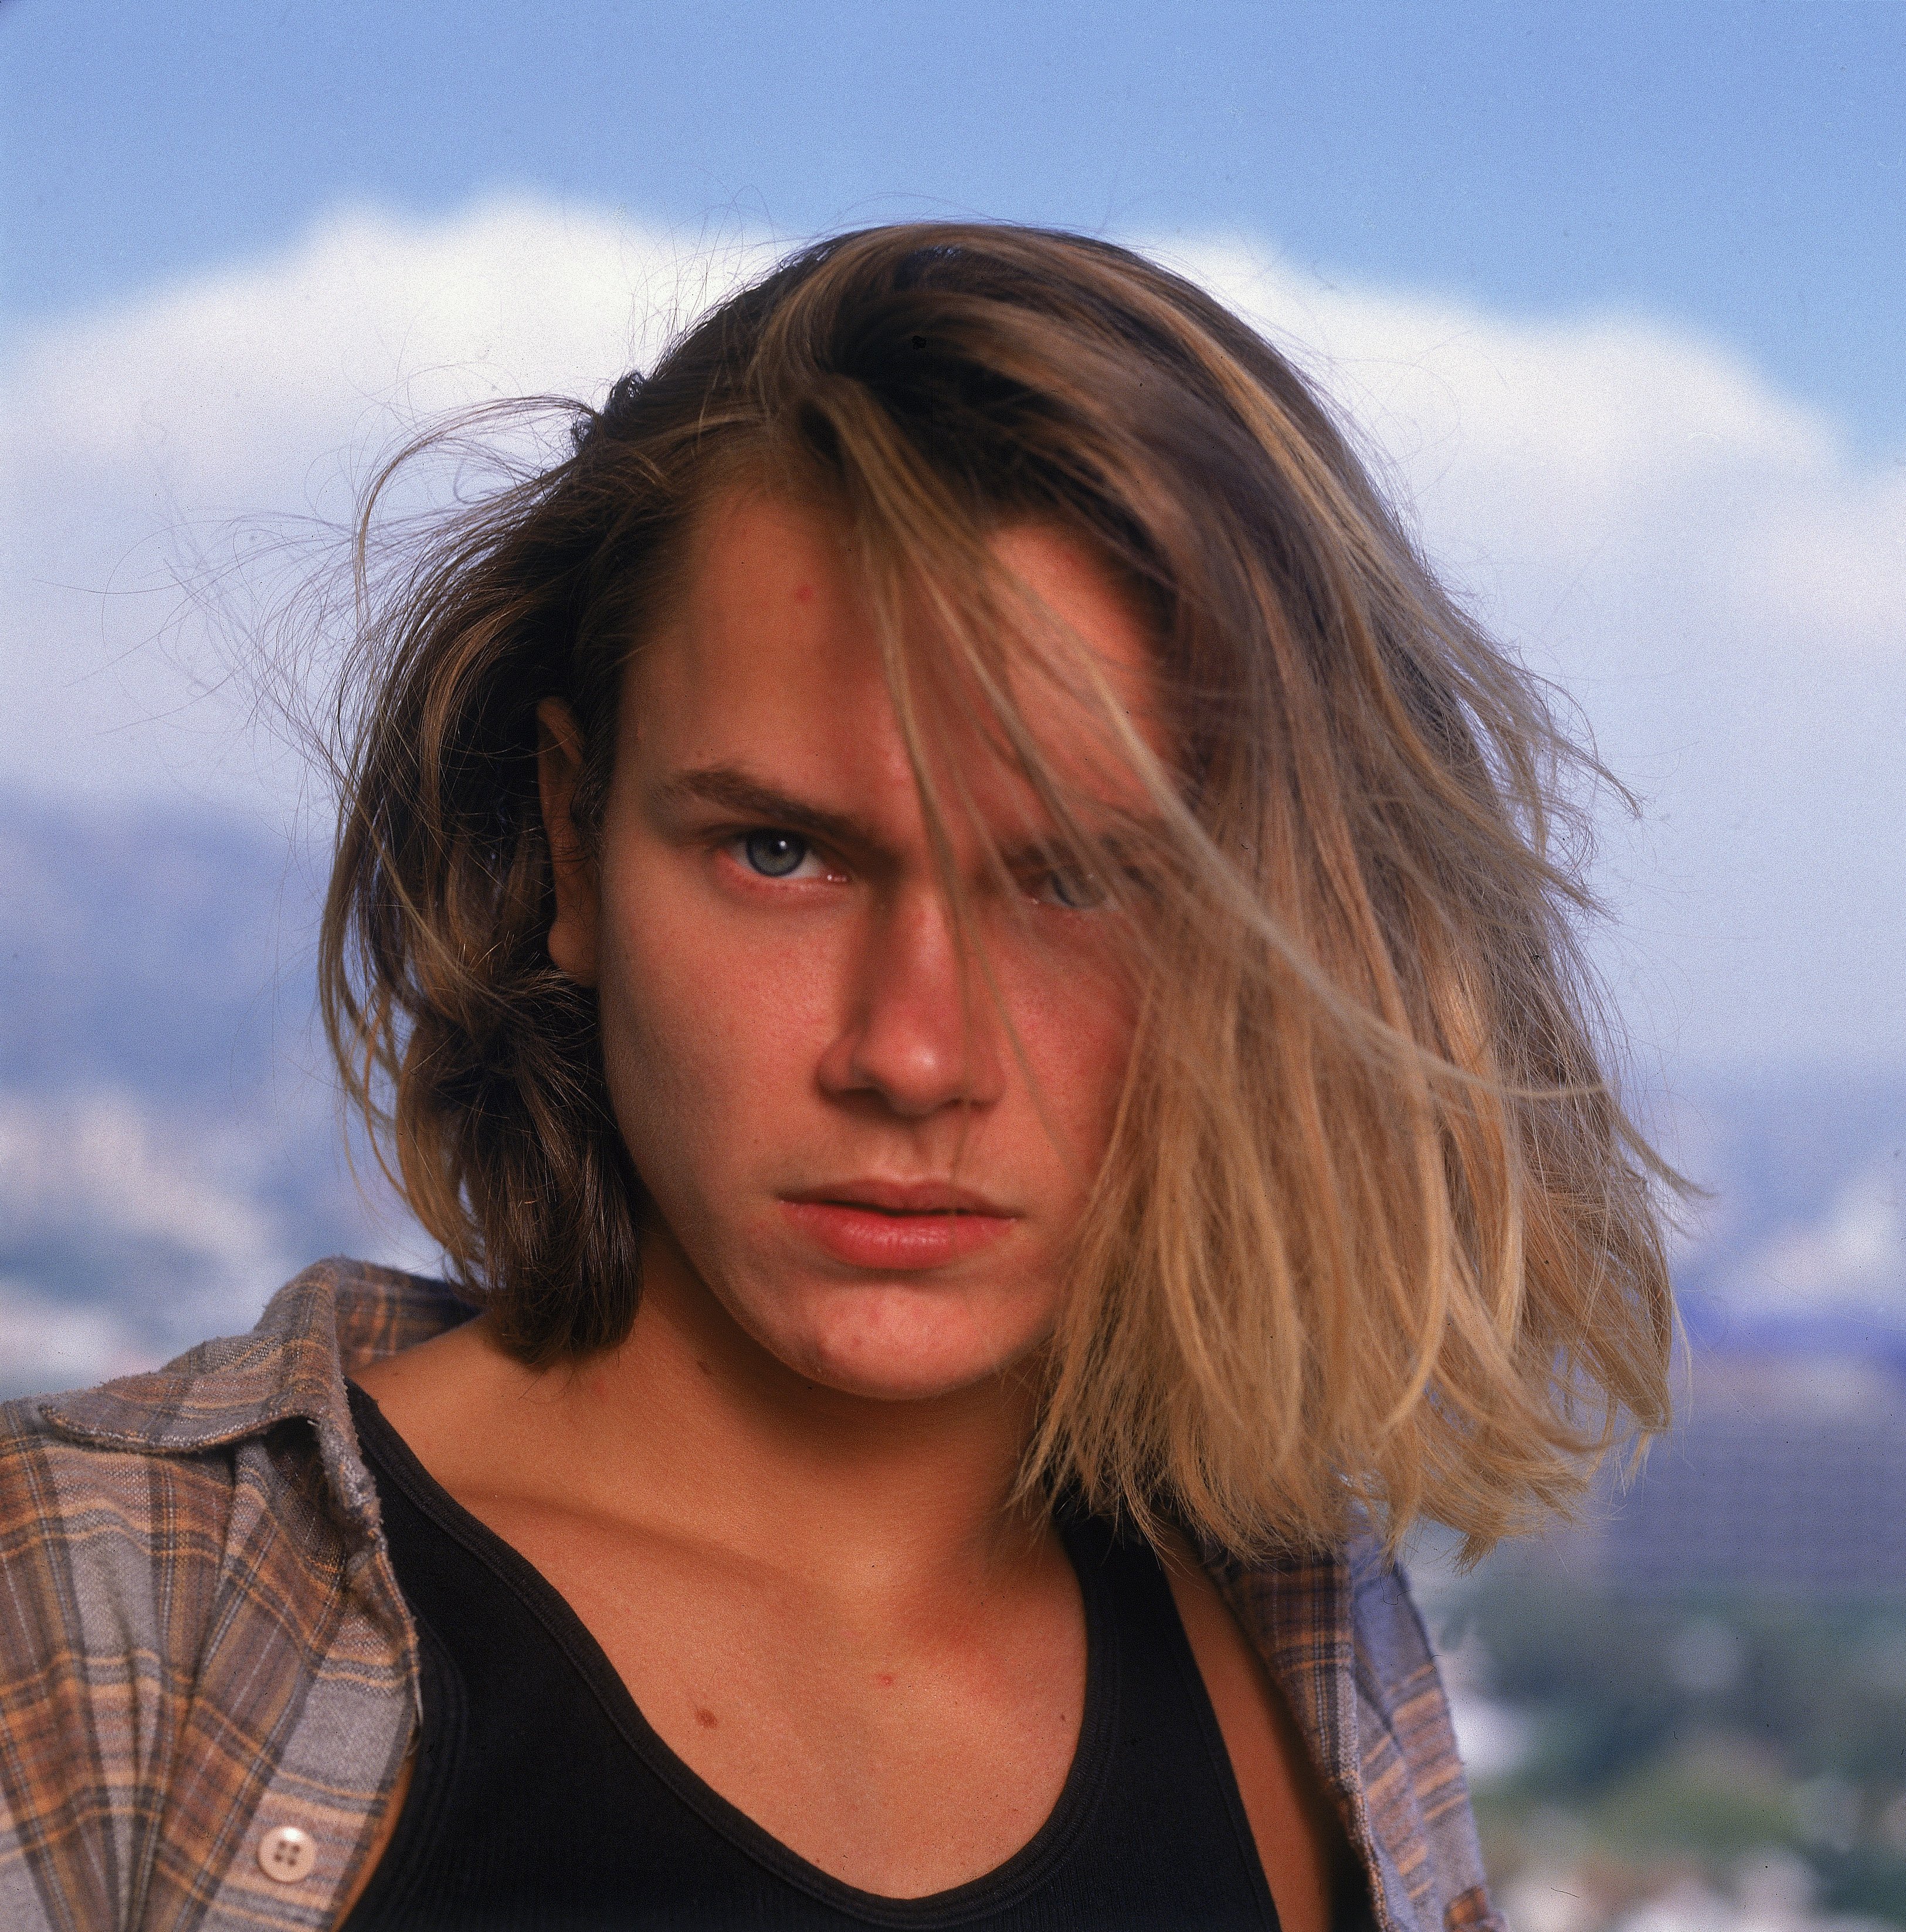 Outdoor headshot of River Phoenix in 1991| Photo: Getty Images